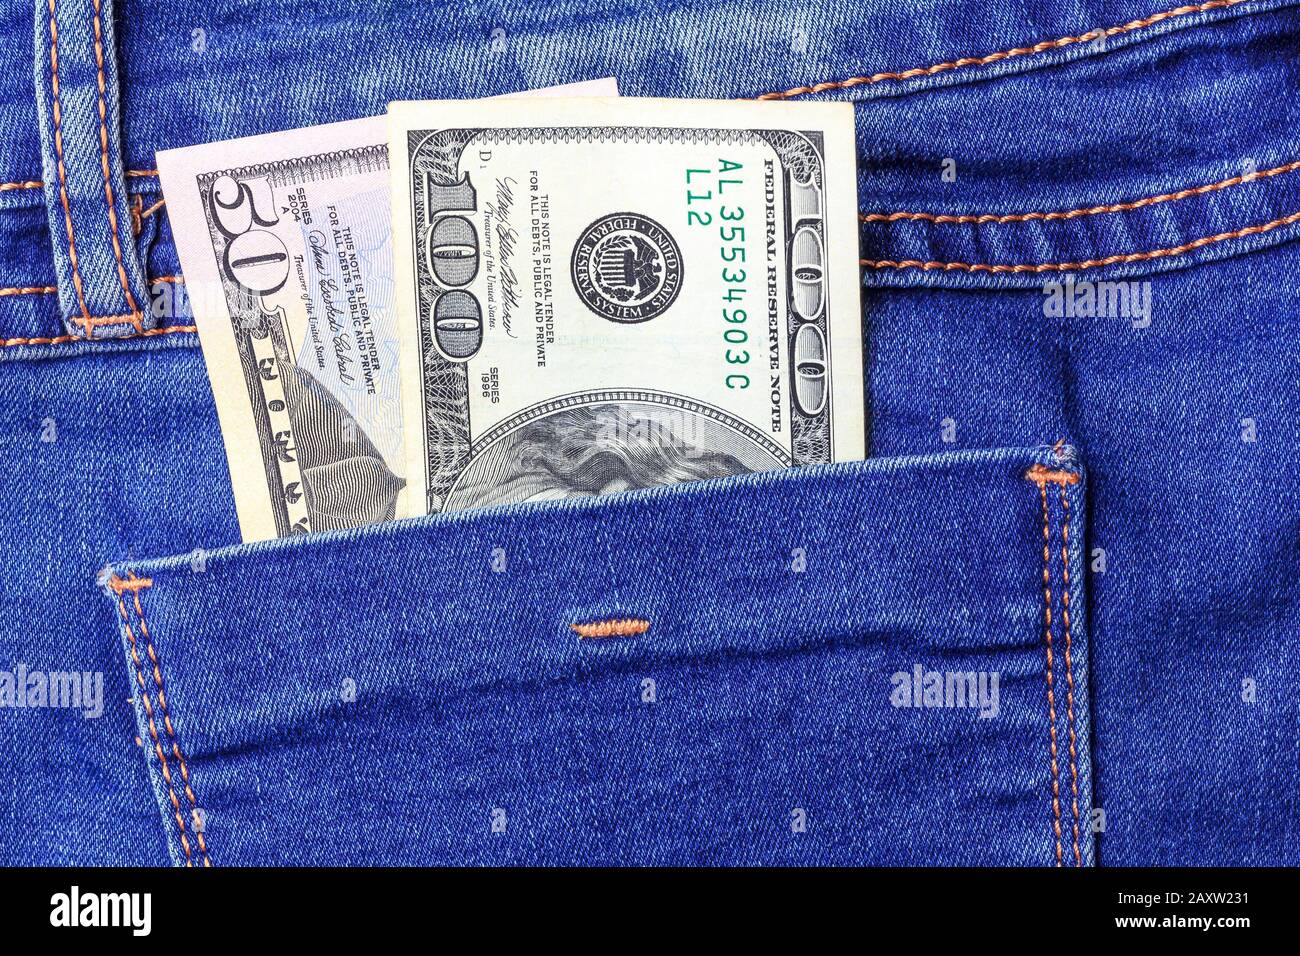 fifty and one hundred dollars in the back pocket of blue jeans Stock Photo